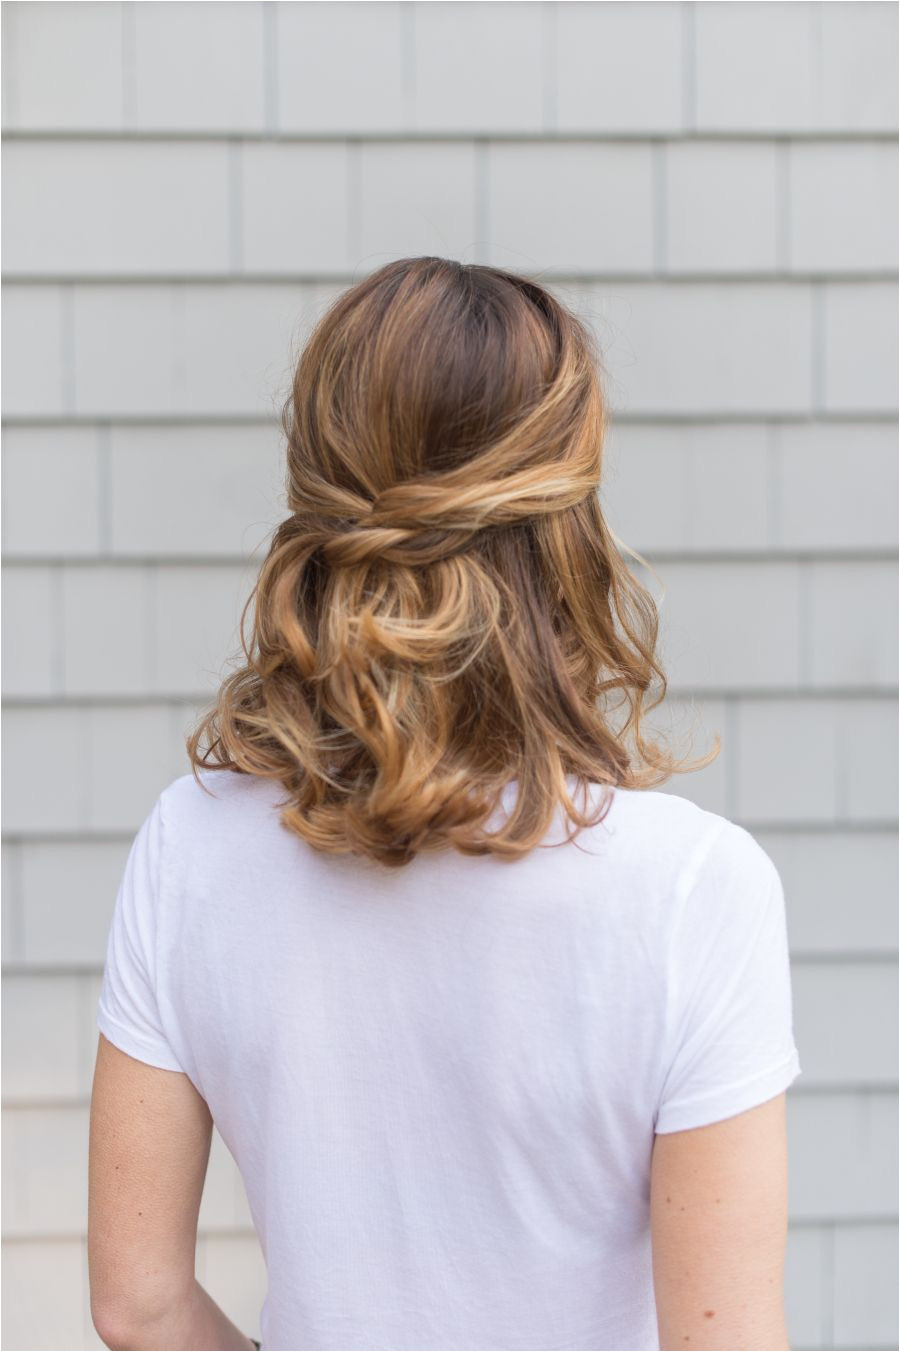 With the utility of a ponytail and the soft femininity of having your hair down this half up half down hairstyle is as perfect for every day life as it is